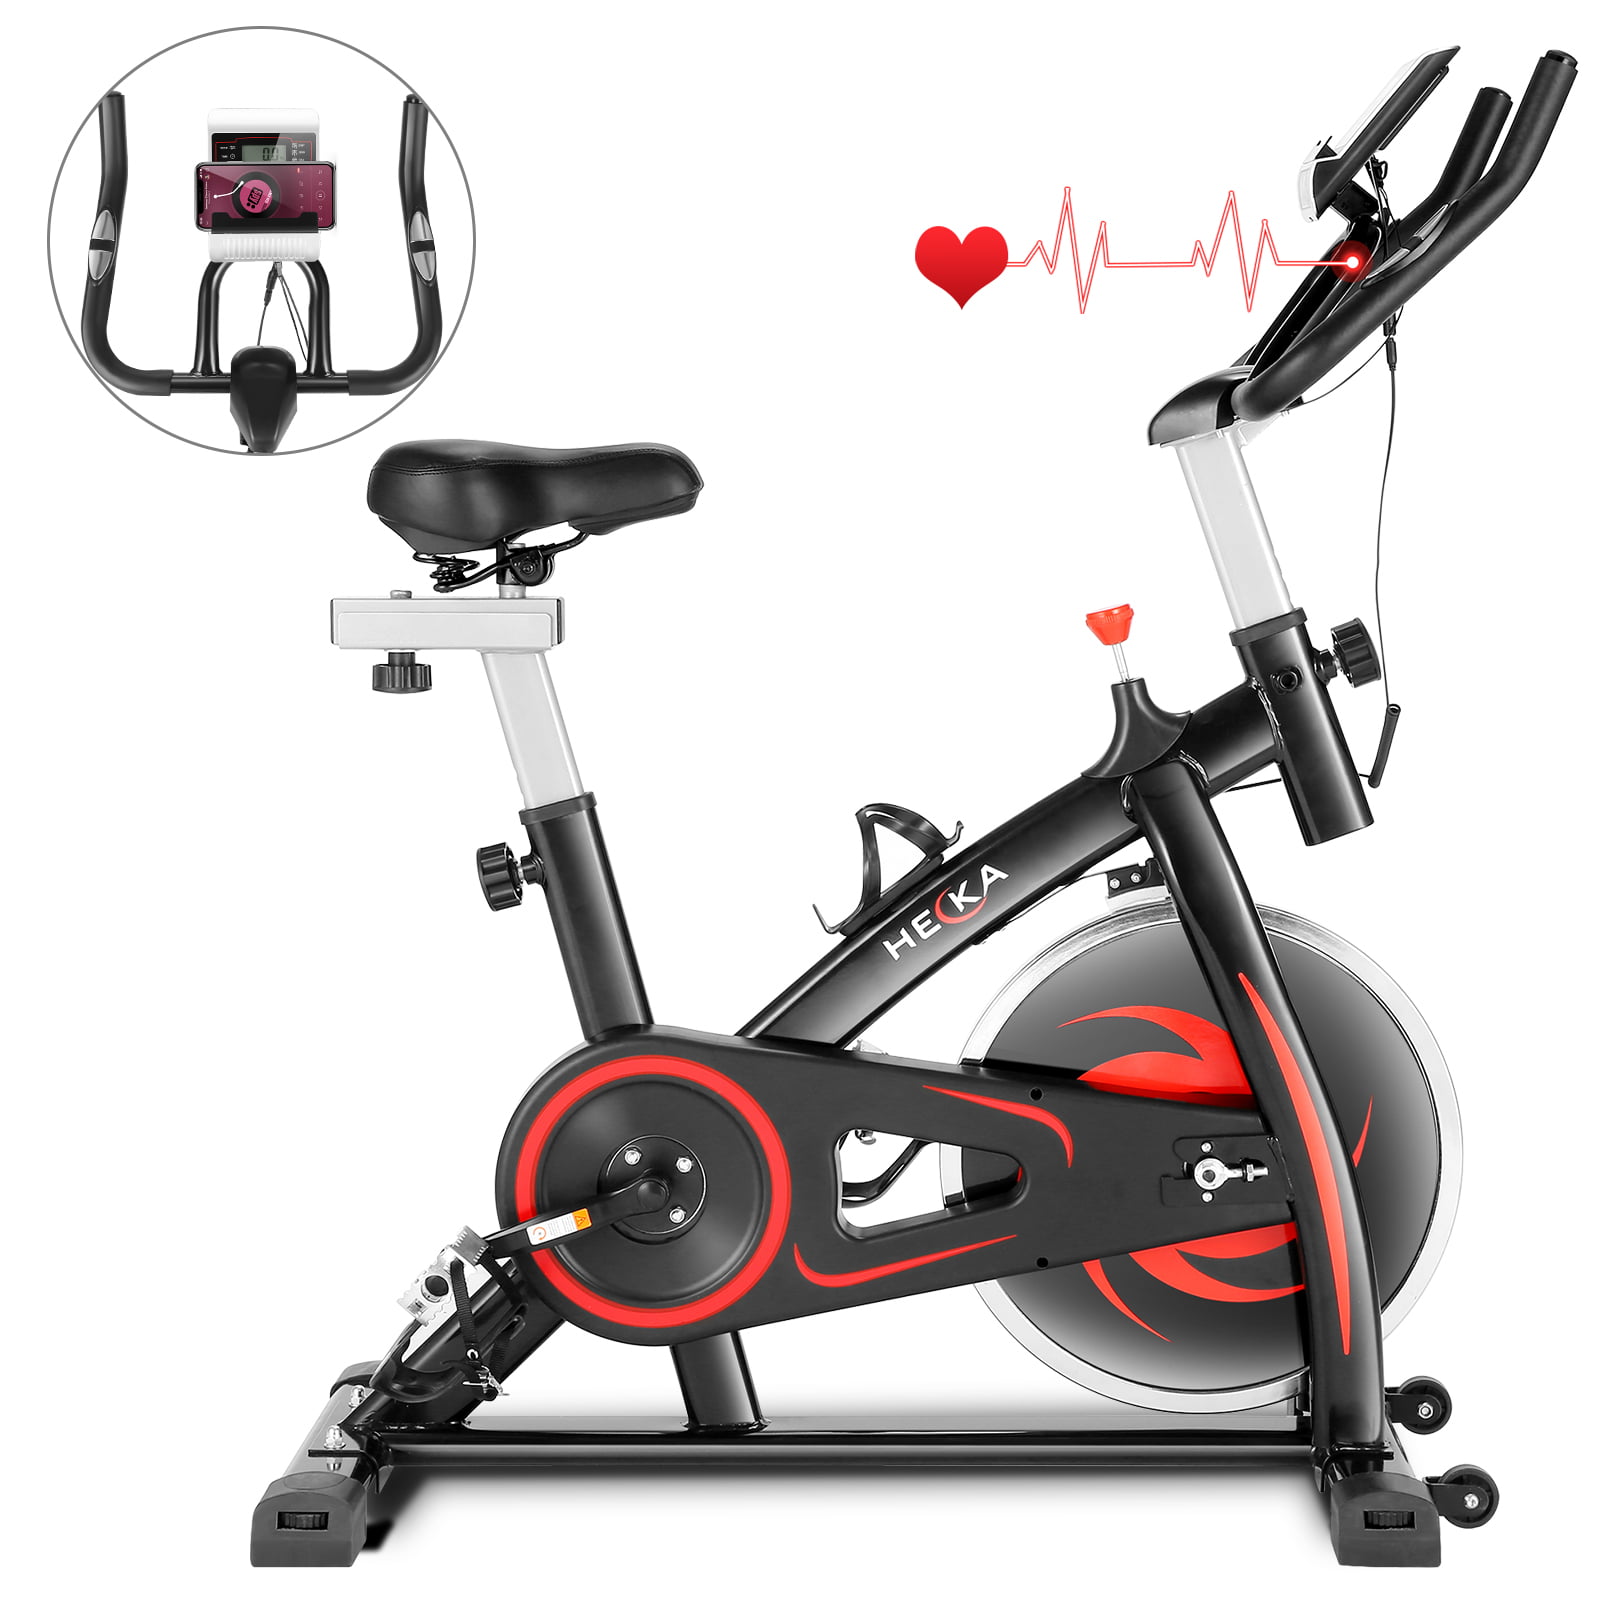 Details about   HEKA Stationary Exercise Bicycle Indoor Bike Cardio Home Gym Cycling Fitness &# 